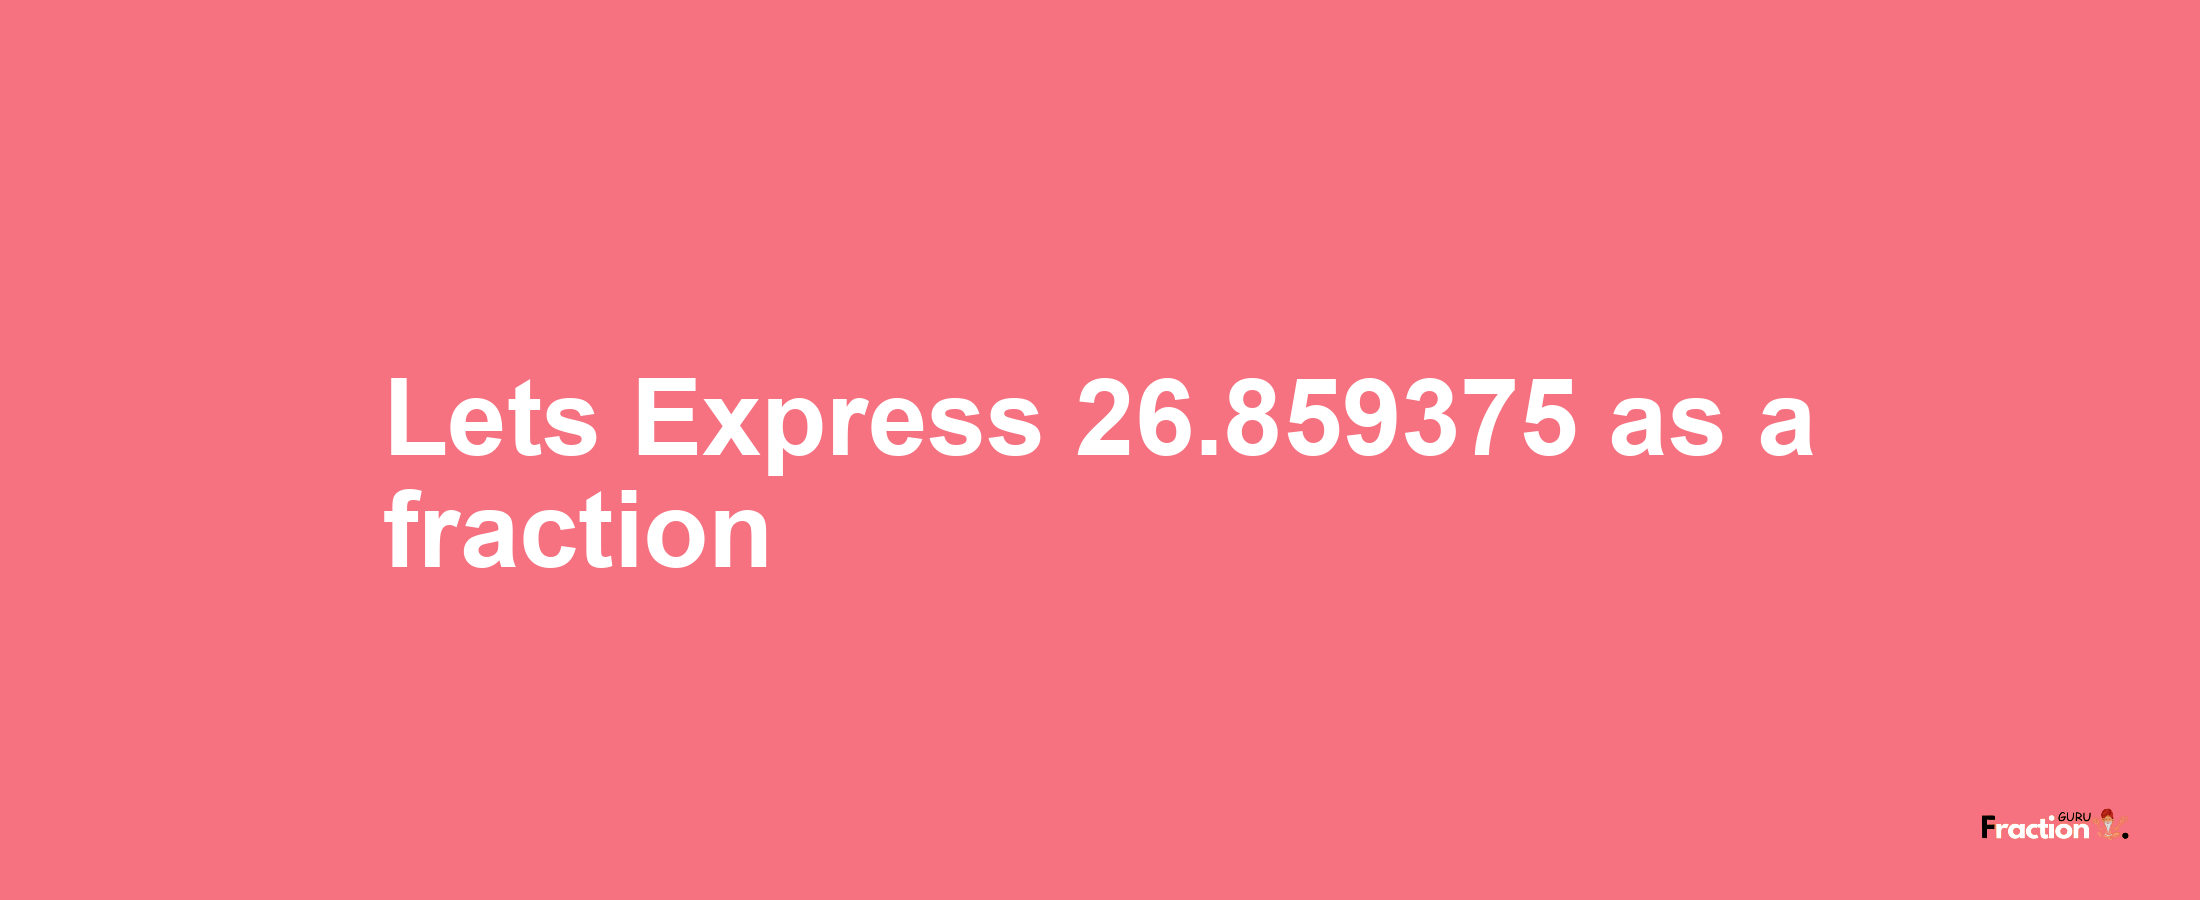 Lets Express 26.859375 as afraction